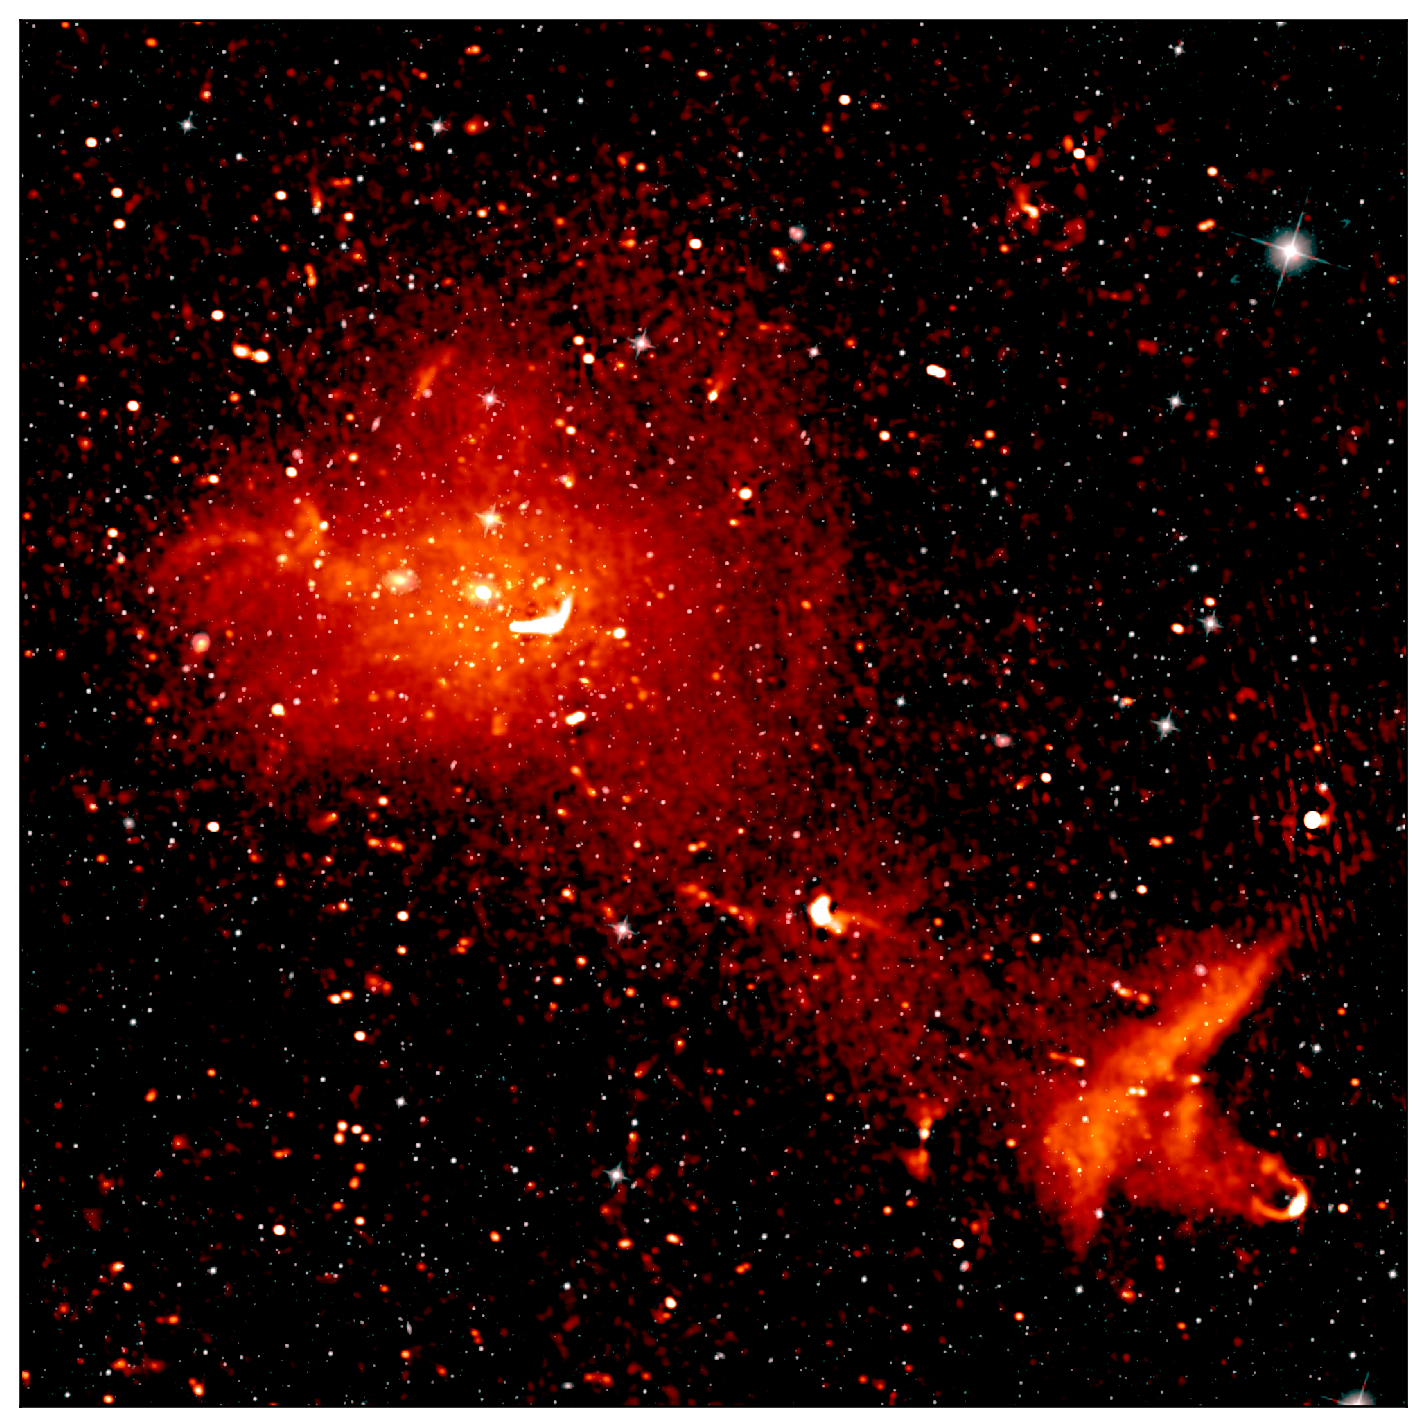 The Coma Cluster, here in an image taken by the European radio telescope LOFAR, is 300 million light years away from Earth and consists of more than 1,000 galaxies. A study of the cluster in the 1930s provided the first evidence for the existence of dark matter.